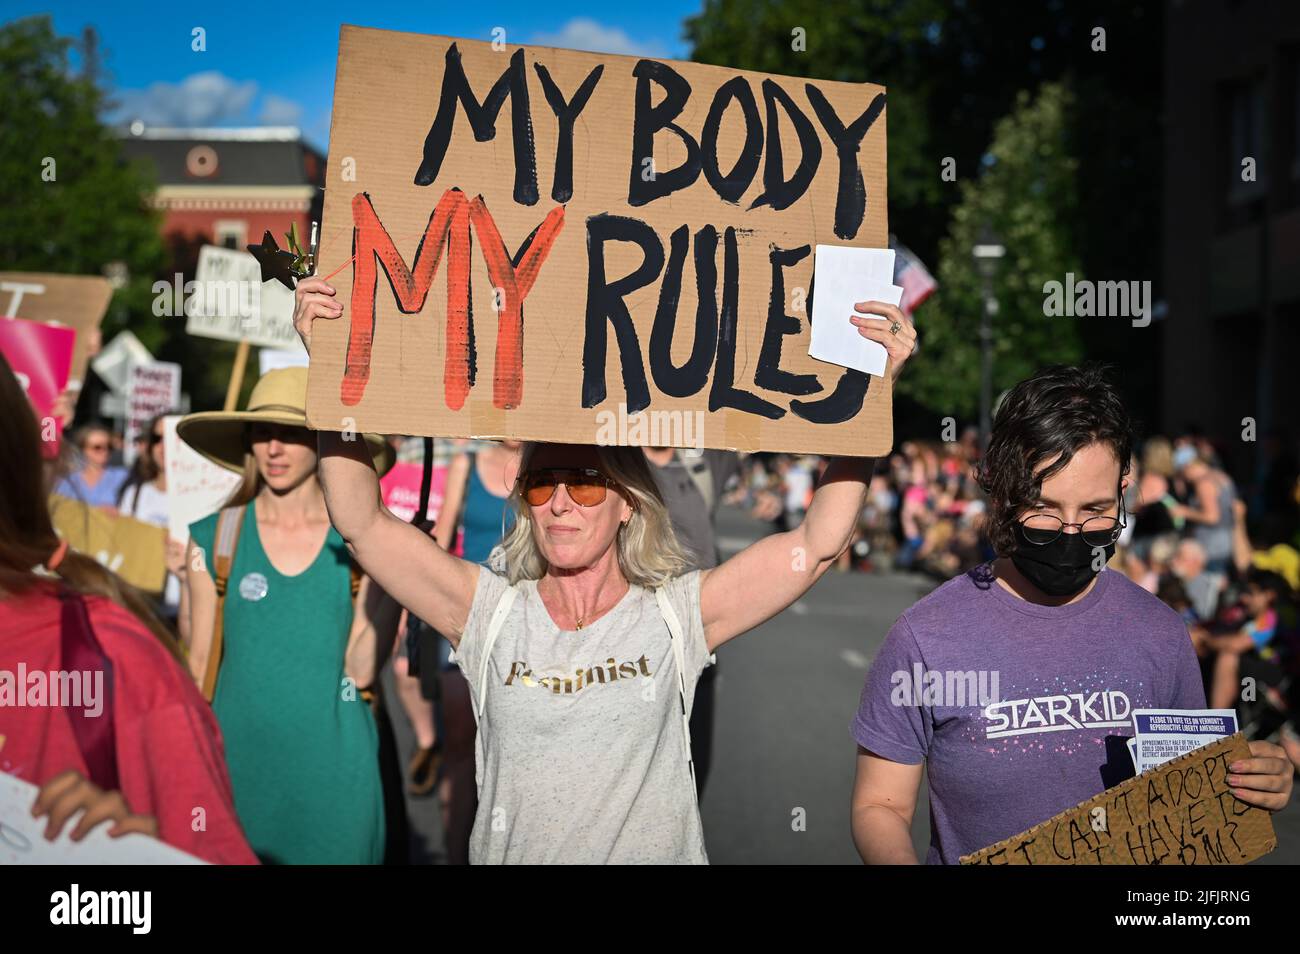 Women marchers protest the US Supreme Court ruling overturning Roe V. Wade in a July 4th parade, Montpelier, Vermont, USA (held July 3). Stock Photo